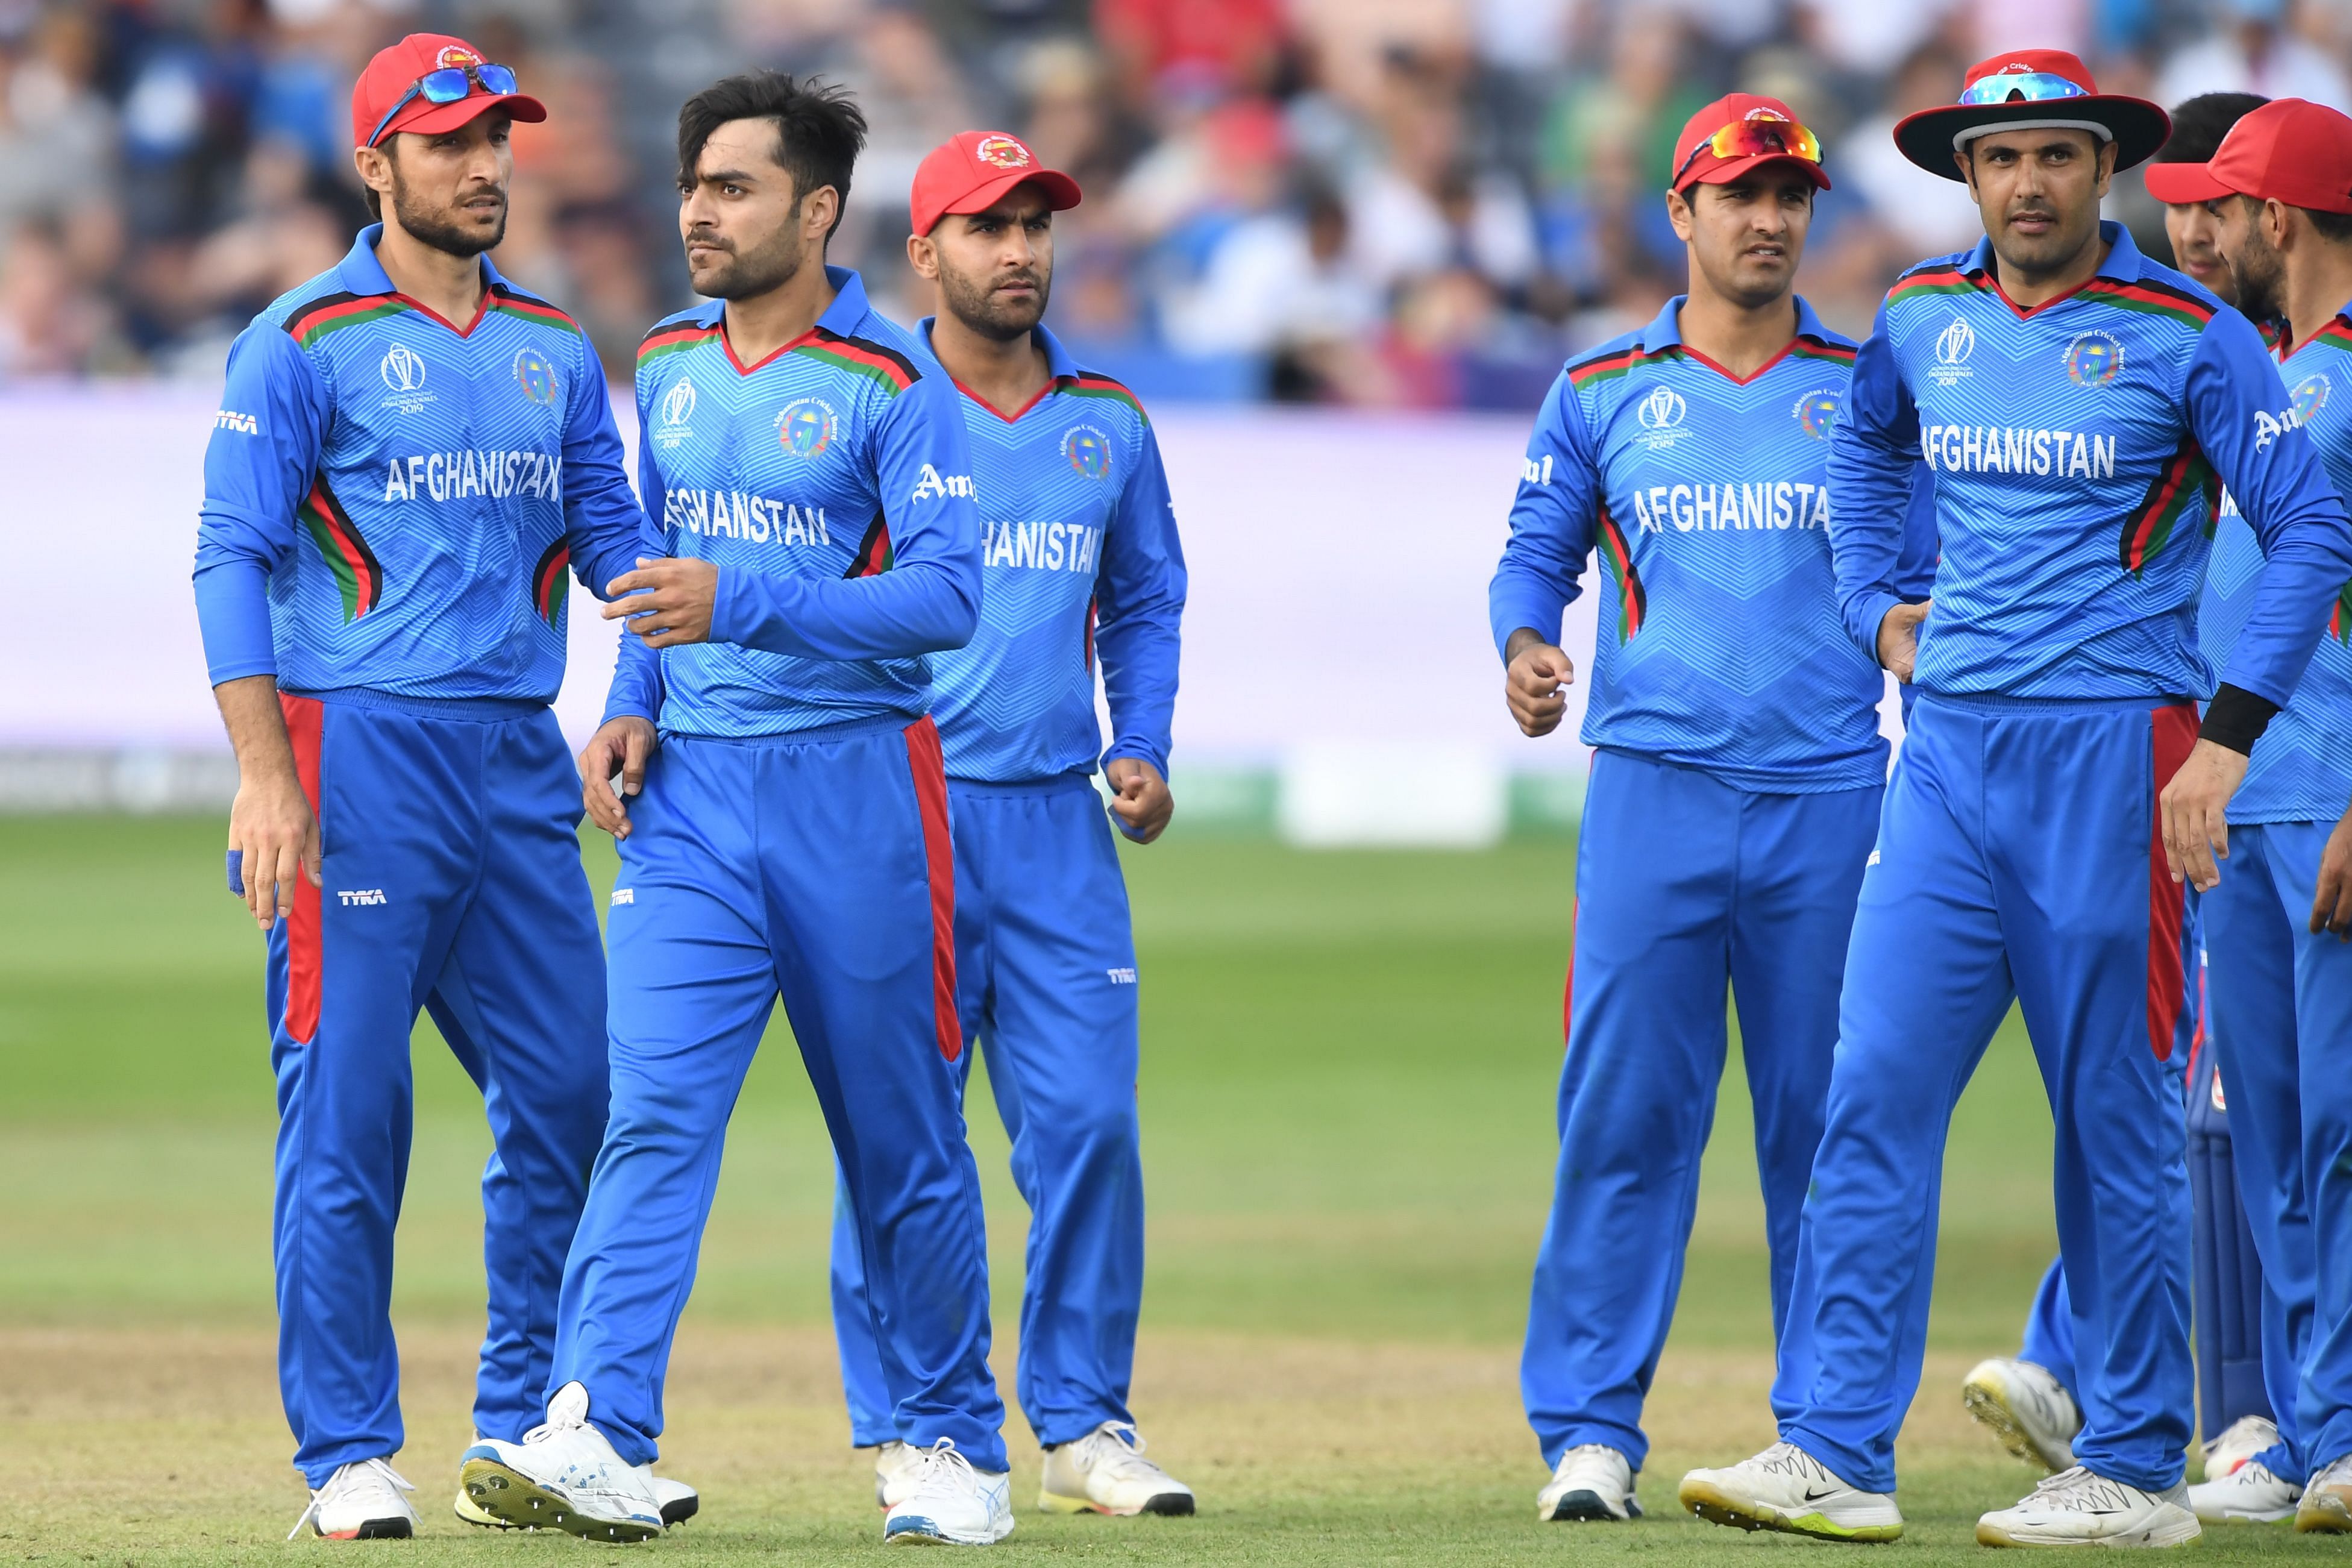 Afghanistan are confident of a win against Si Lanka. Photo credit: AFP